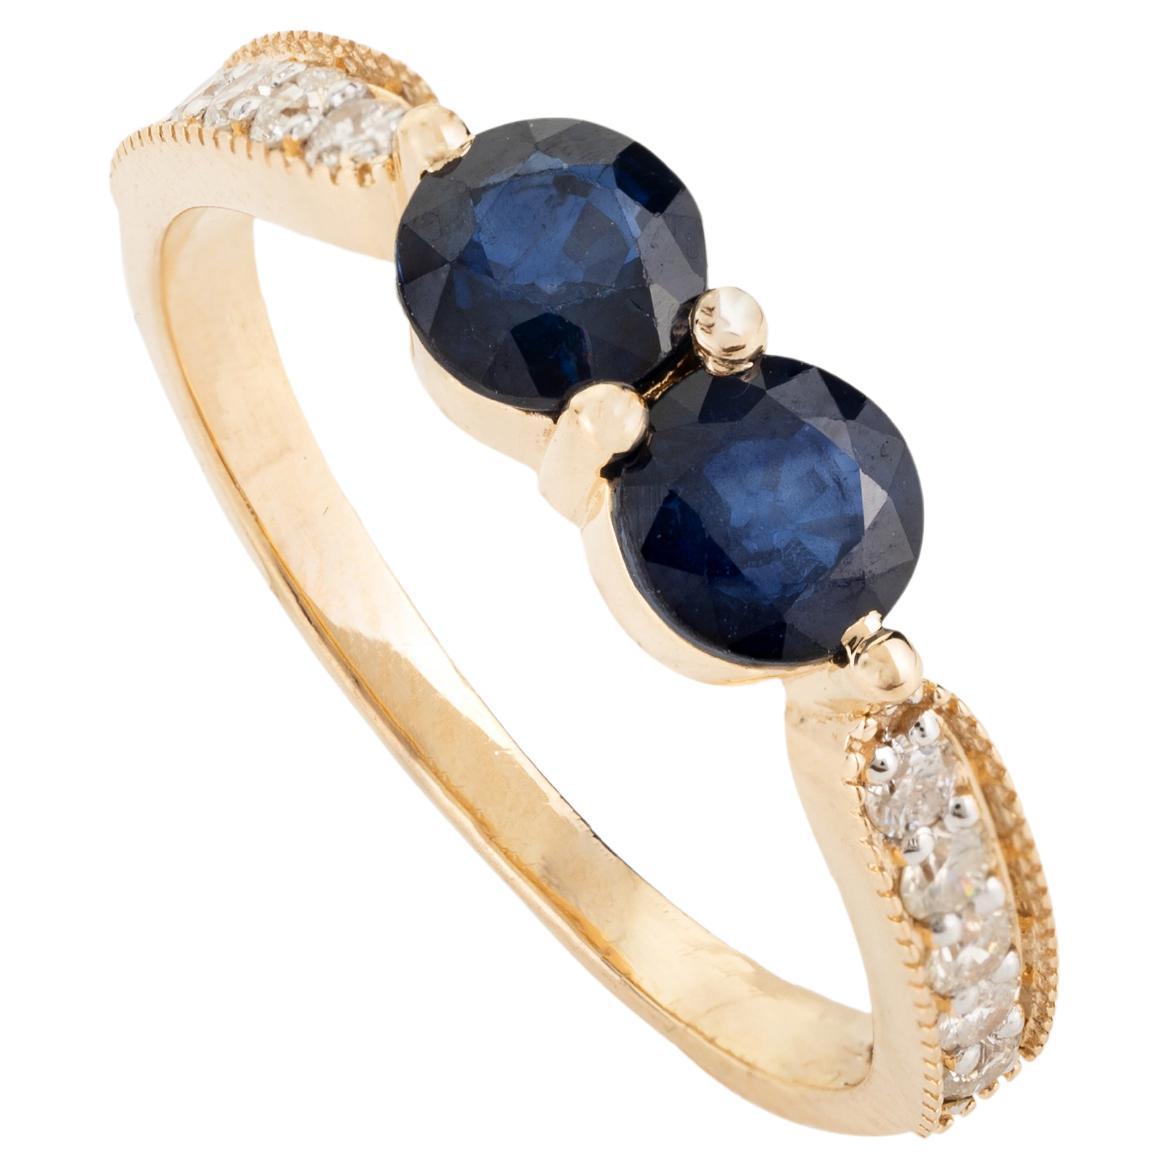 For Sale:  18k Solid Yellow Gold Two Stone Blue Sapphire Diamond Ring Wedding Gift for Her